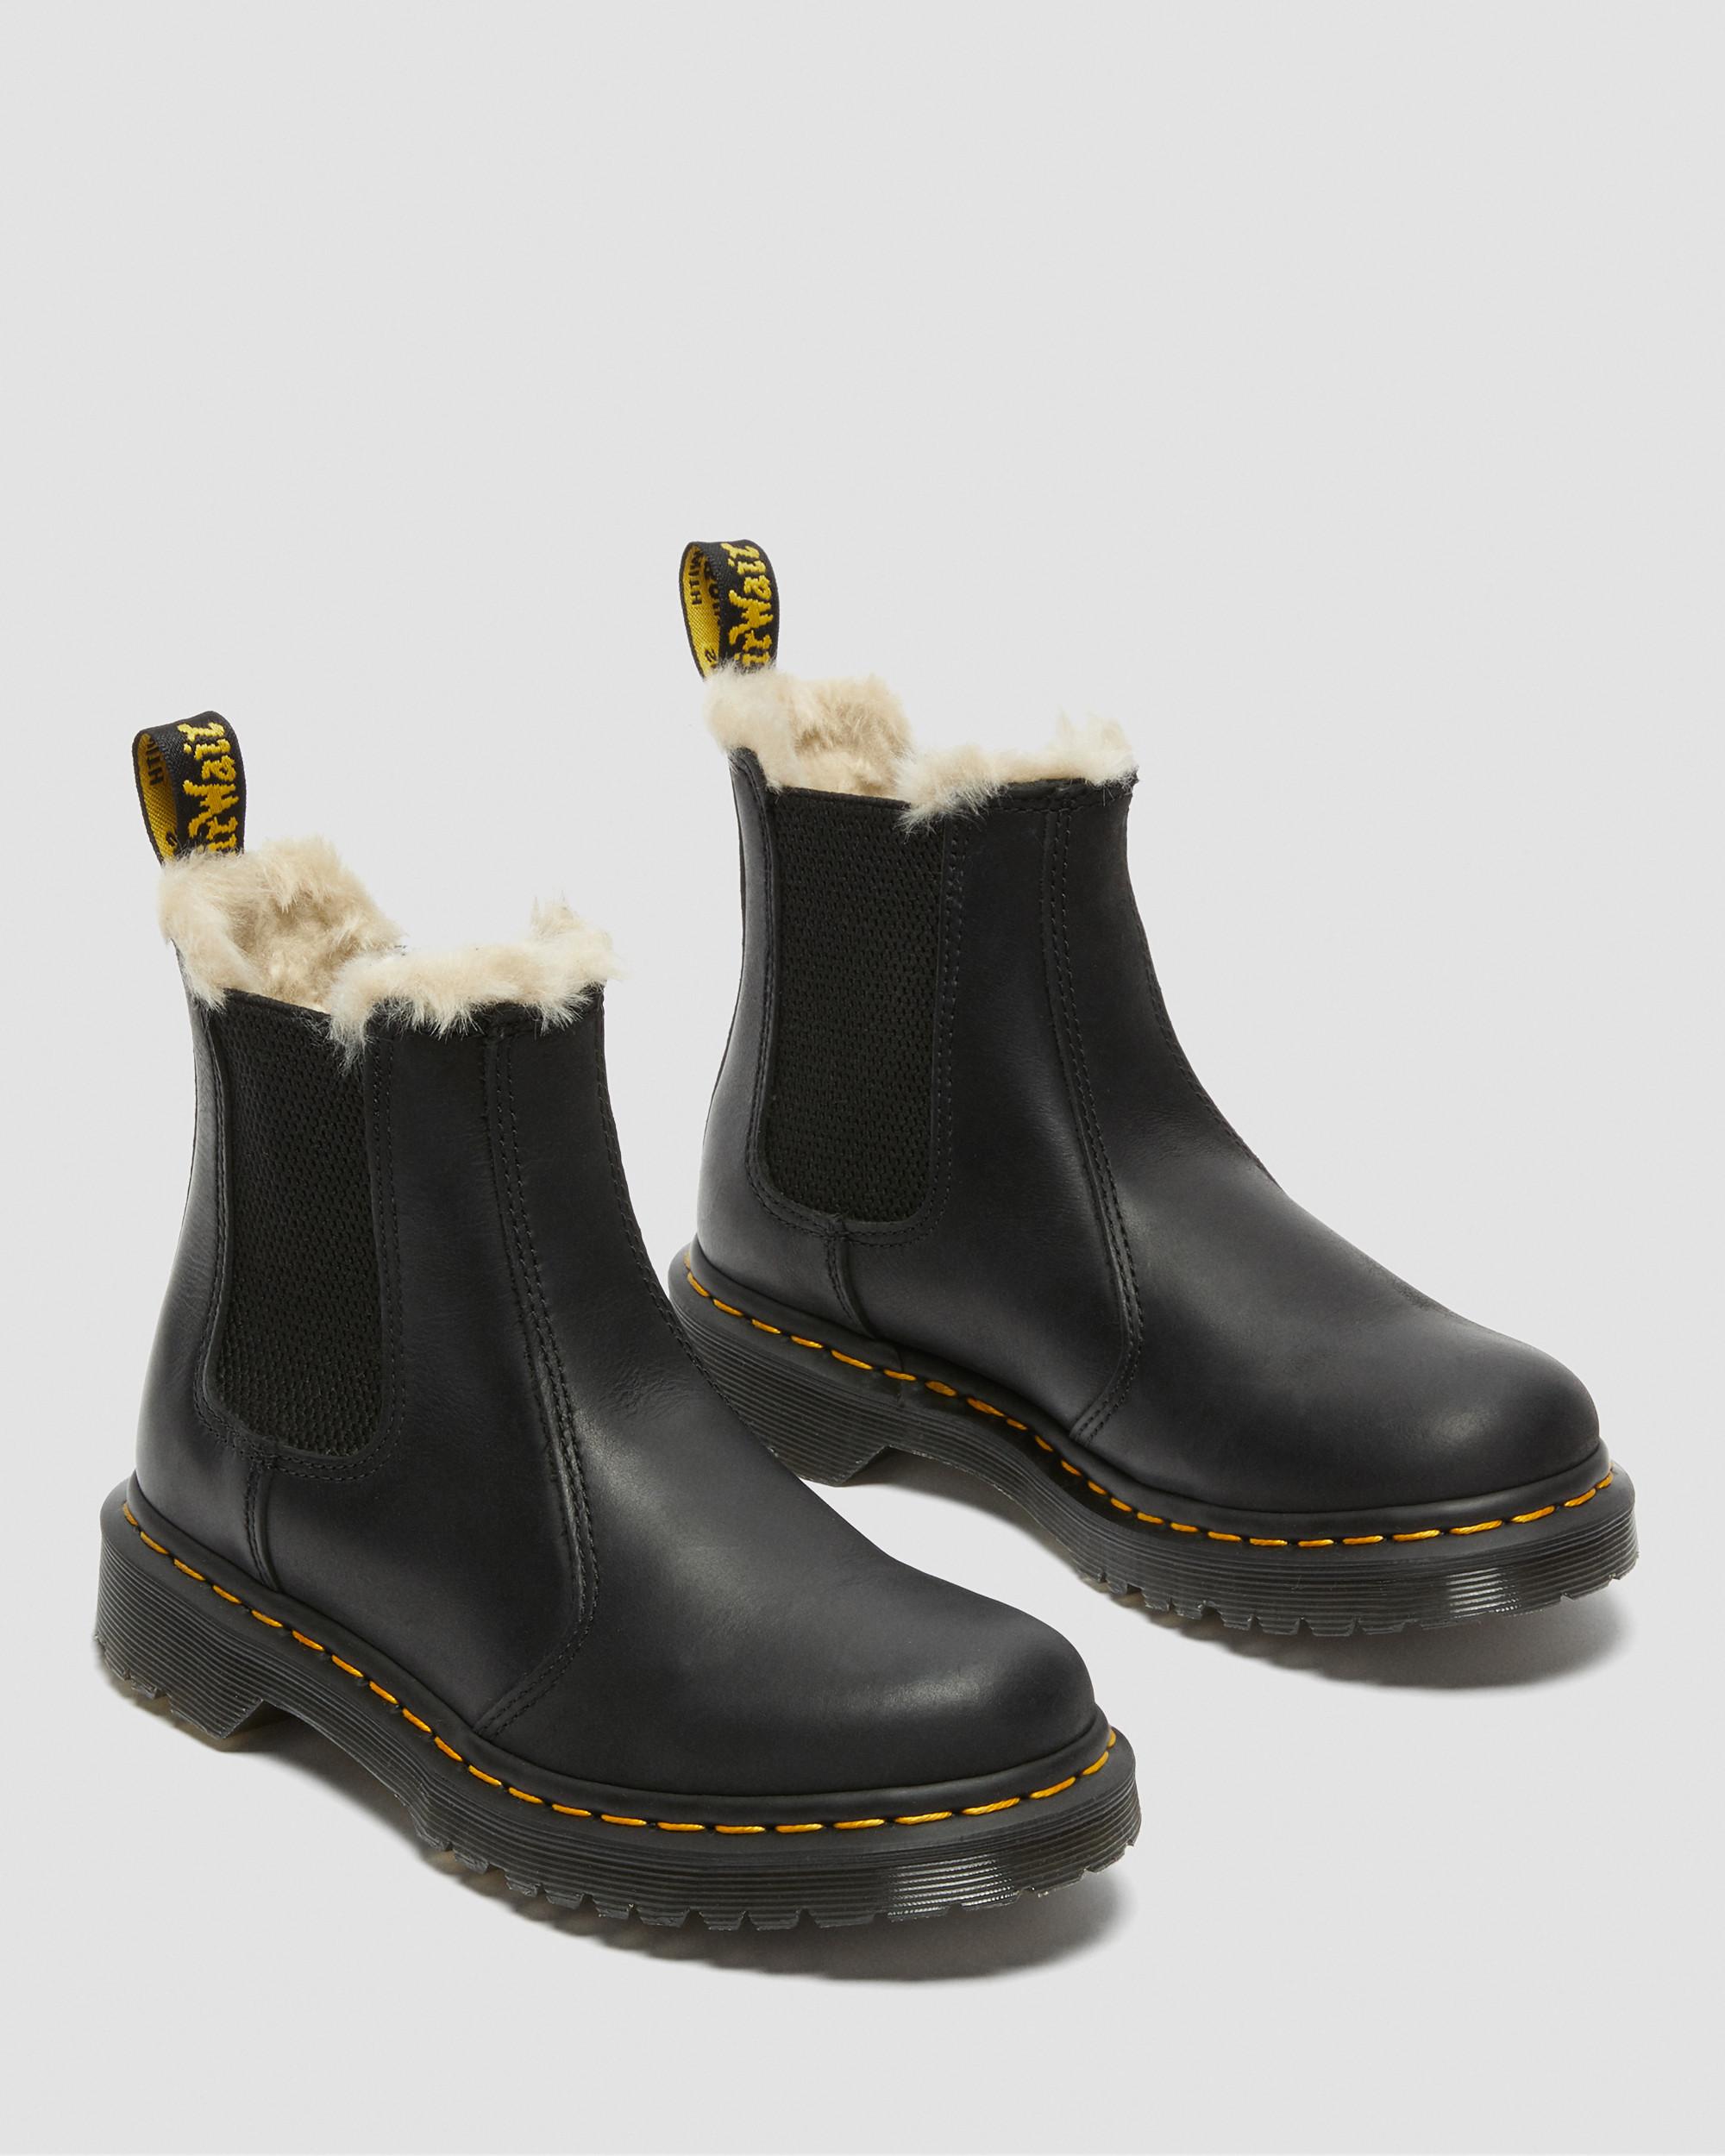 2976 Leonore Burnished Chelsea Boots mit Kunstfellfutter2976 Leonore Chelsea Boots Mit Kunstpelzfutter Dr. Martens